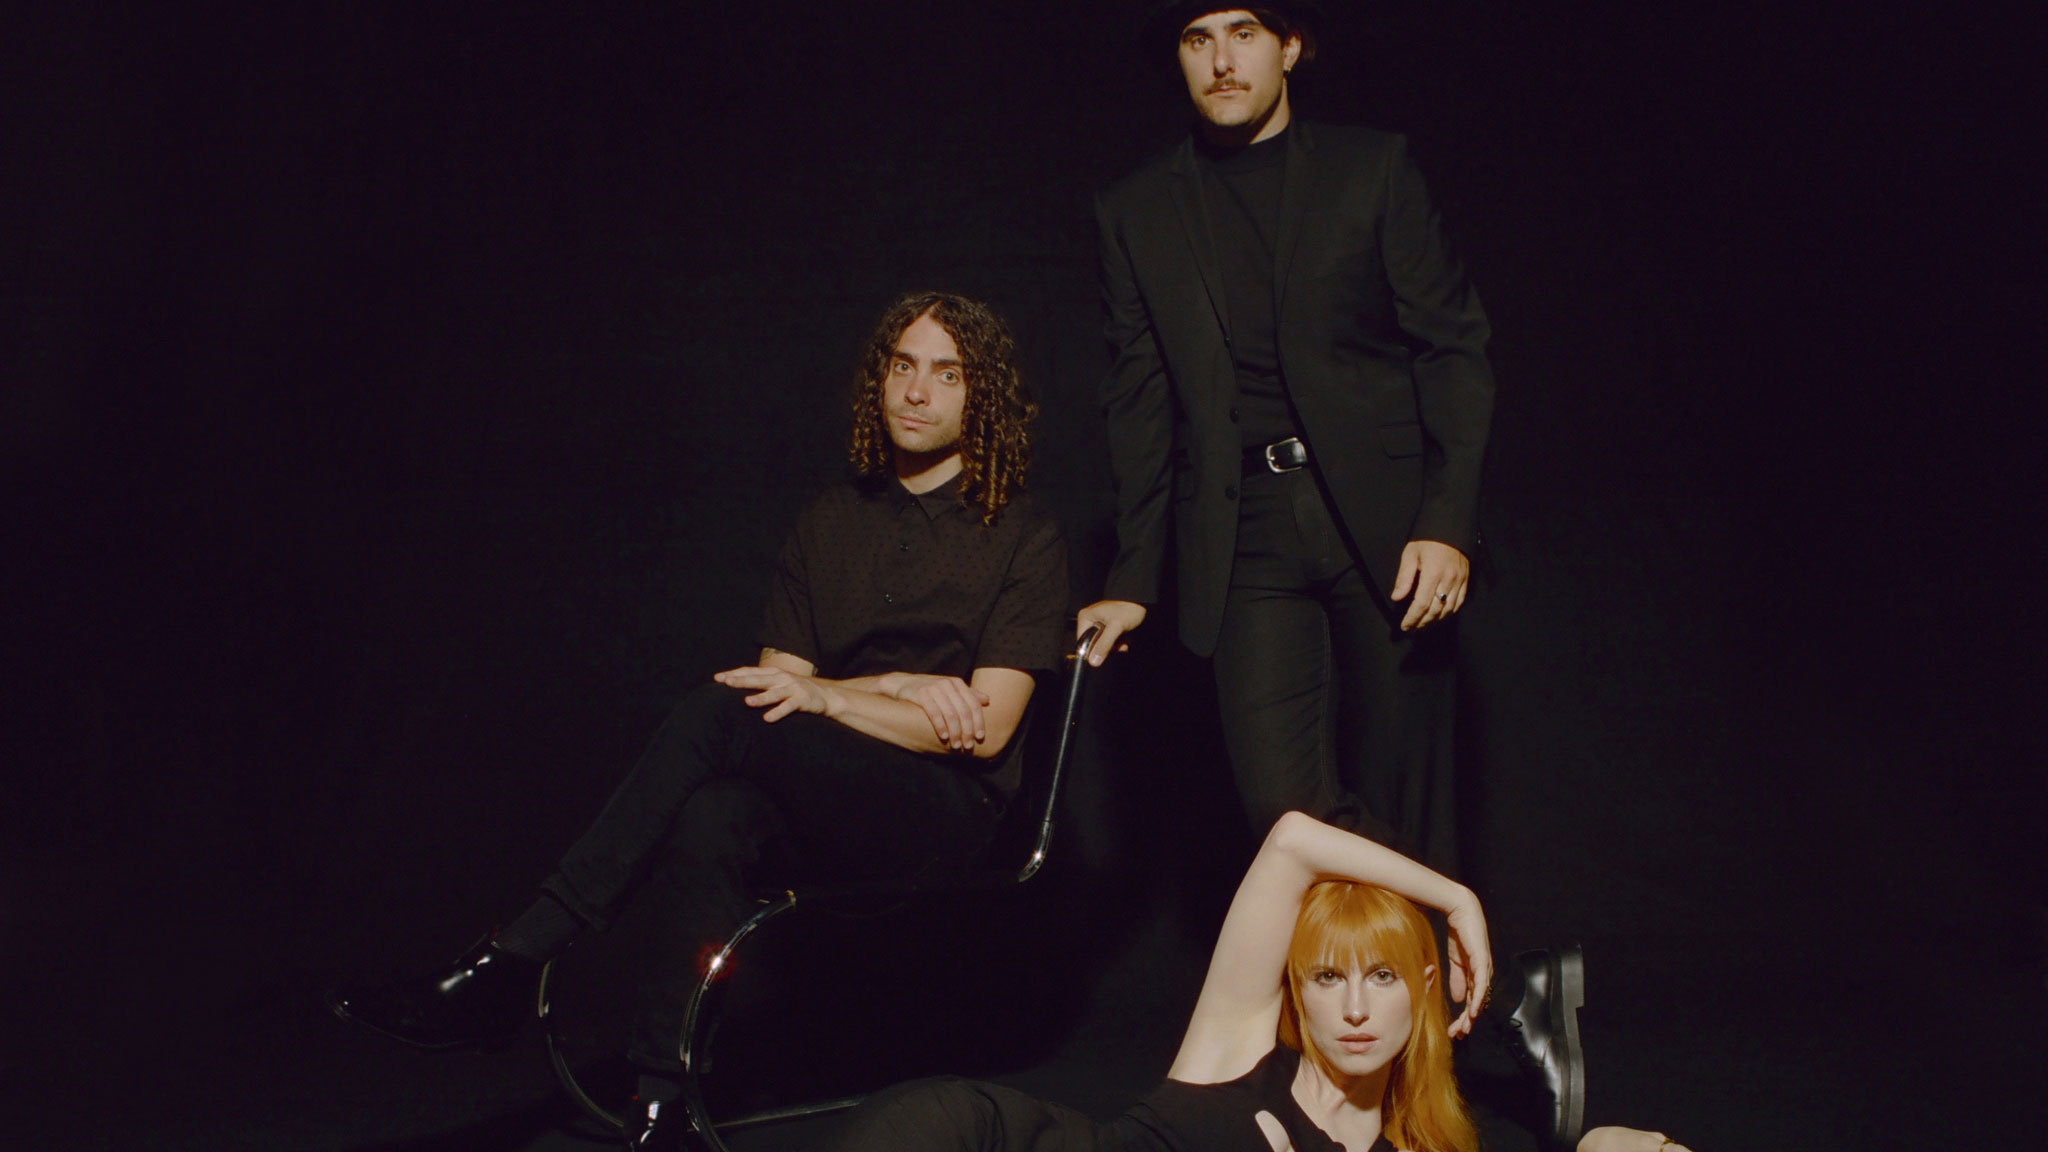 Paramore are on A24's new Stop Making Sense tribute album